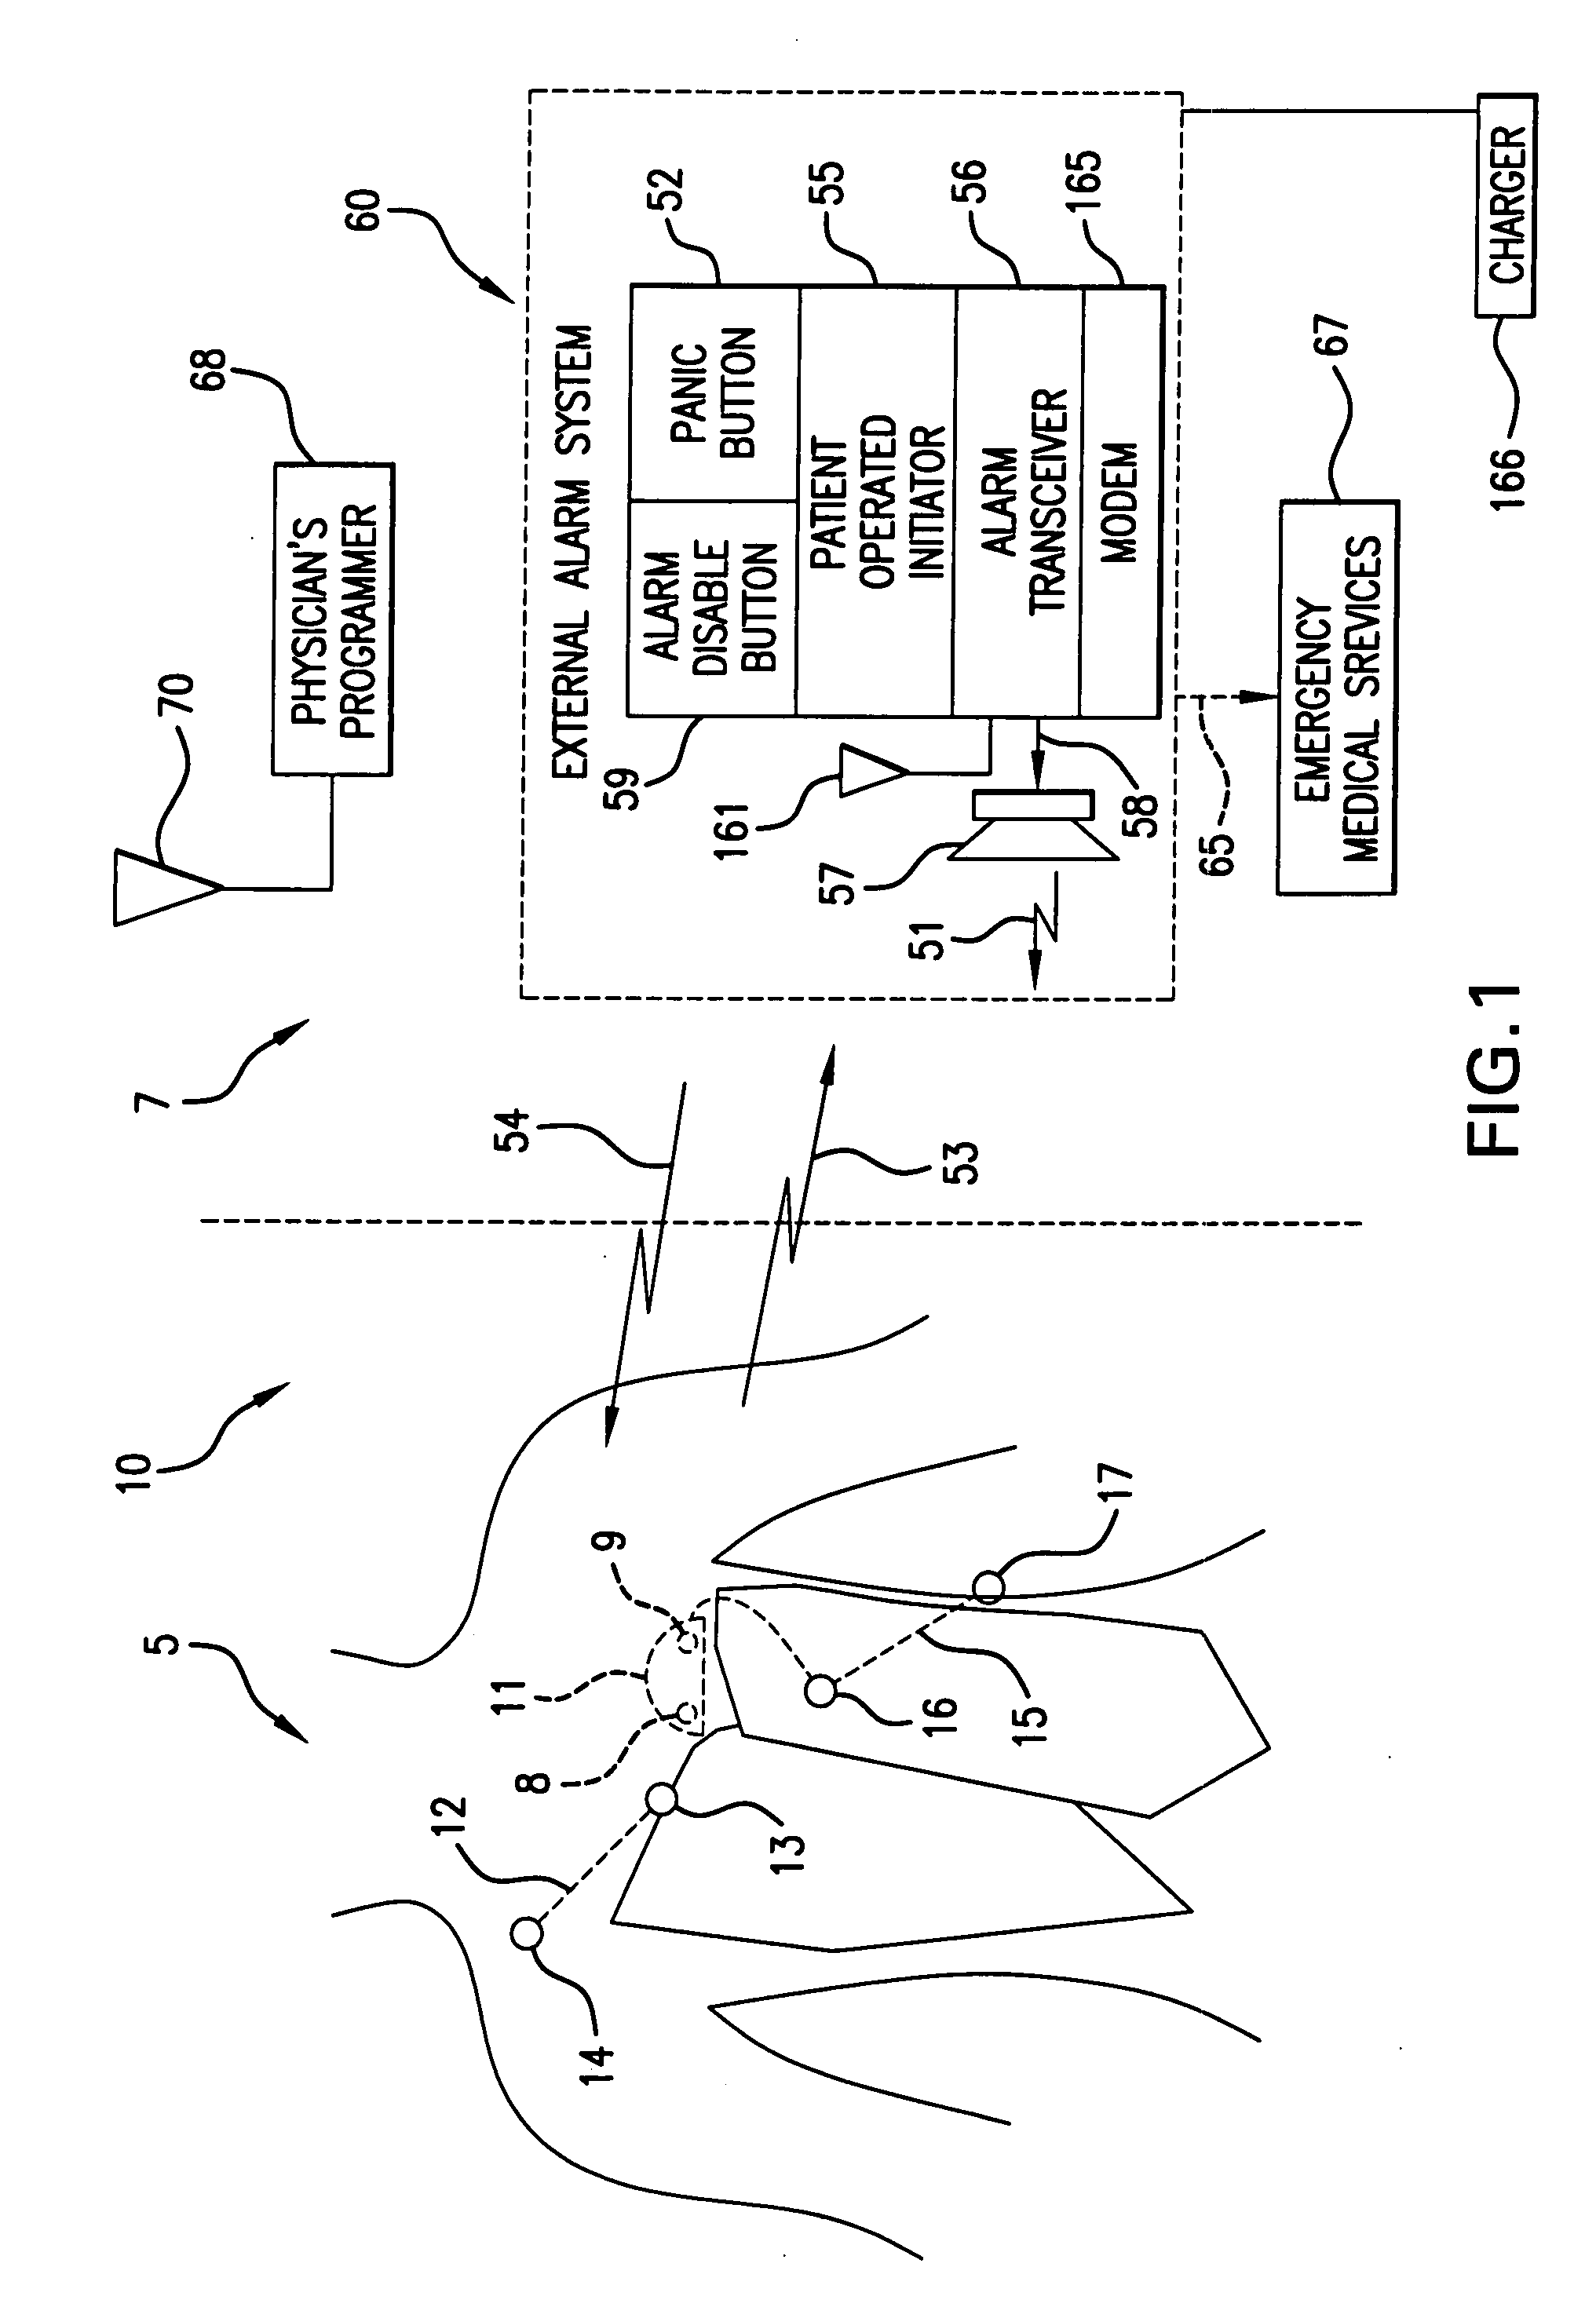 Waveform feature value averaging system and methods for the detection of cardiac events